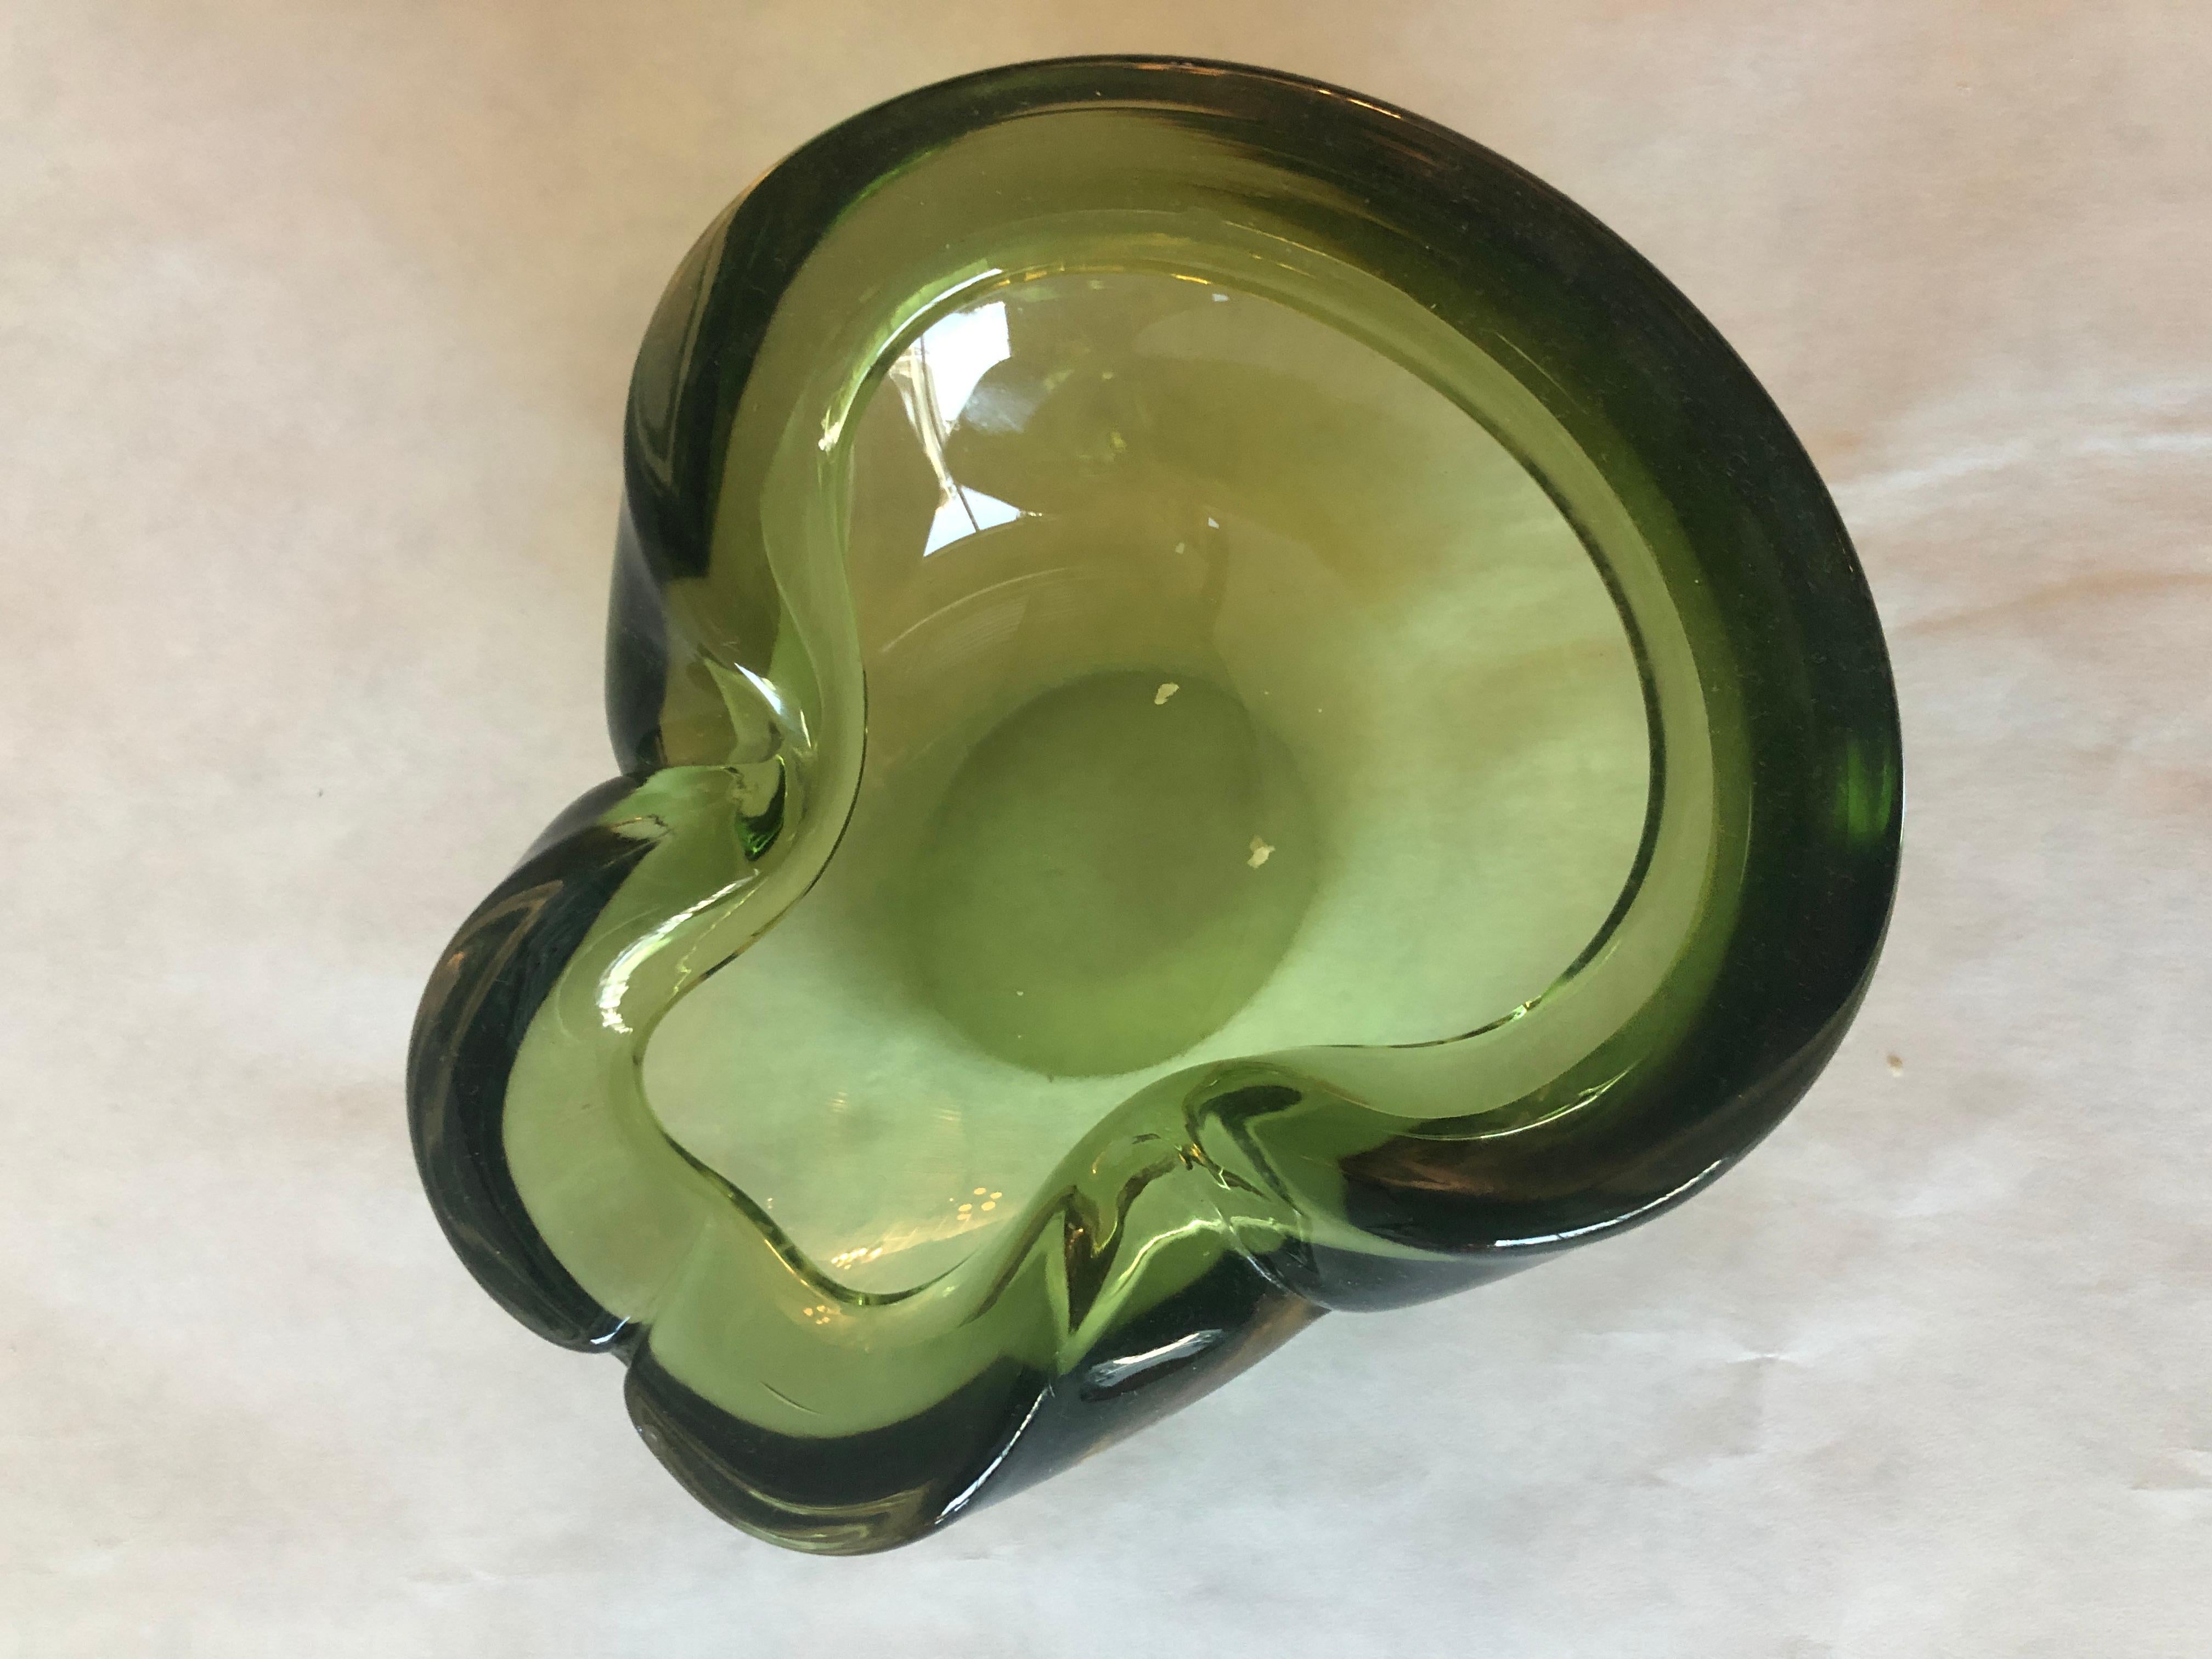 Offered is a Mid-Century Modern Italian murano blown glass in Peridot green ashtray / candy bowl / decorative object. The waves in this bowl and the variations of the Peridot green through the waves is quite lovely. Most likely the bowl was